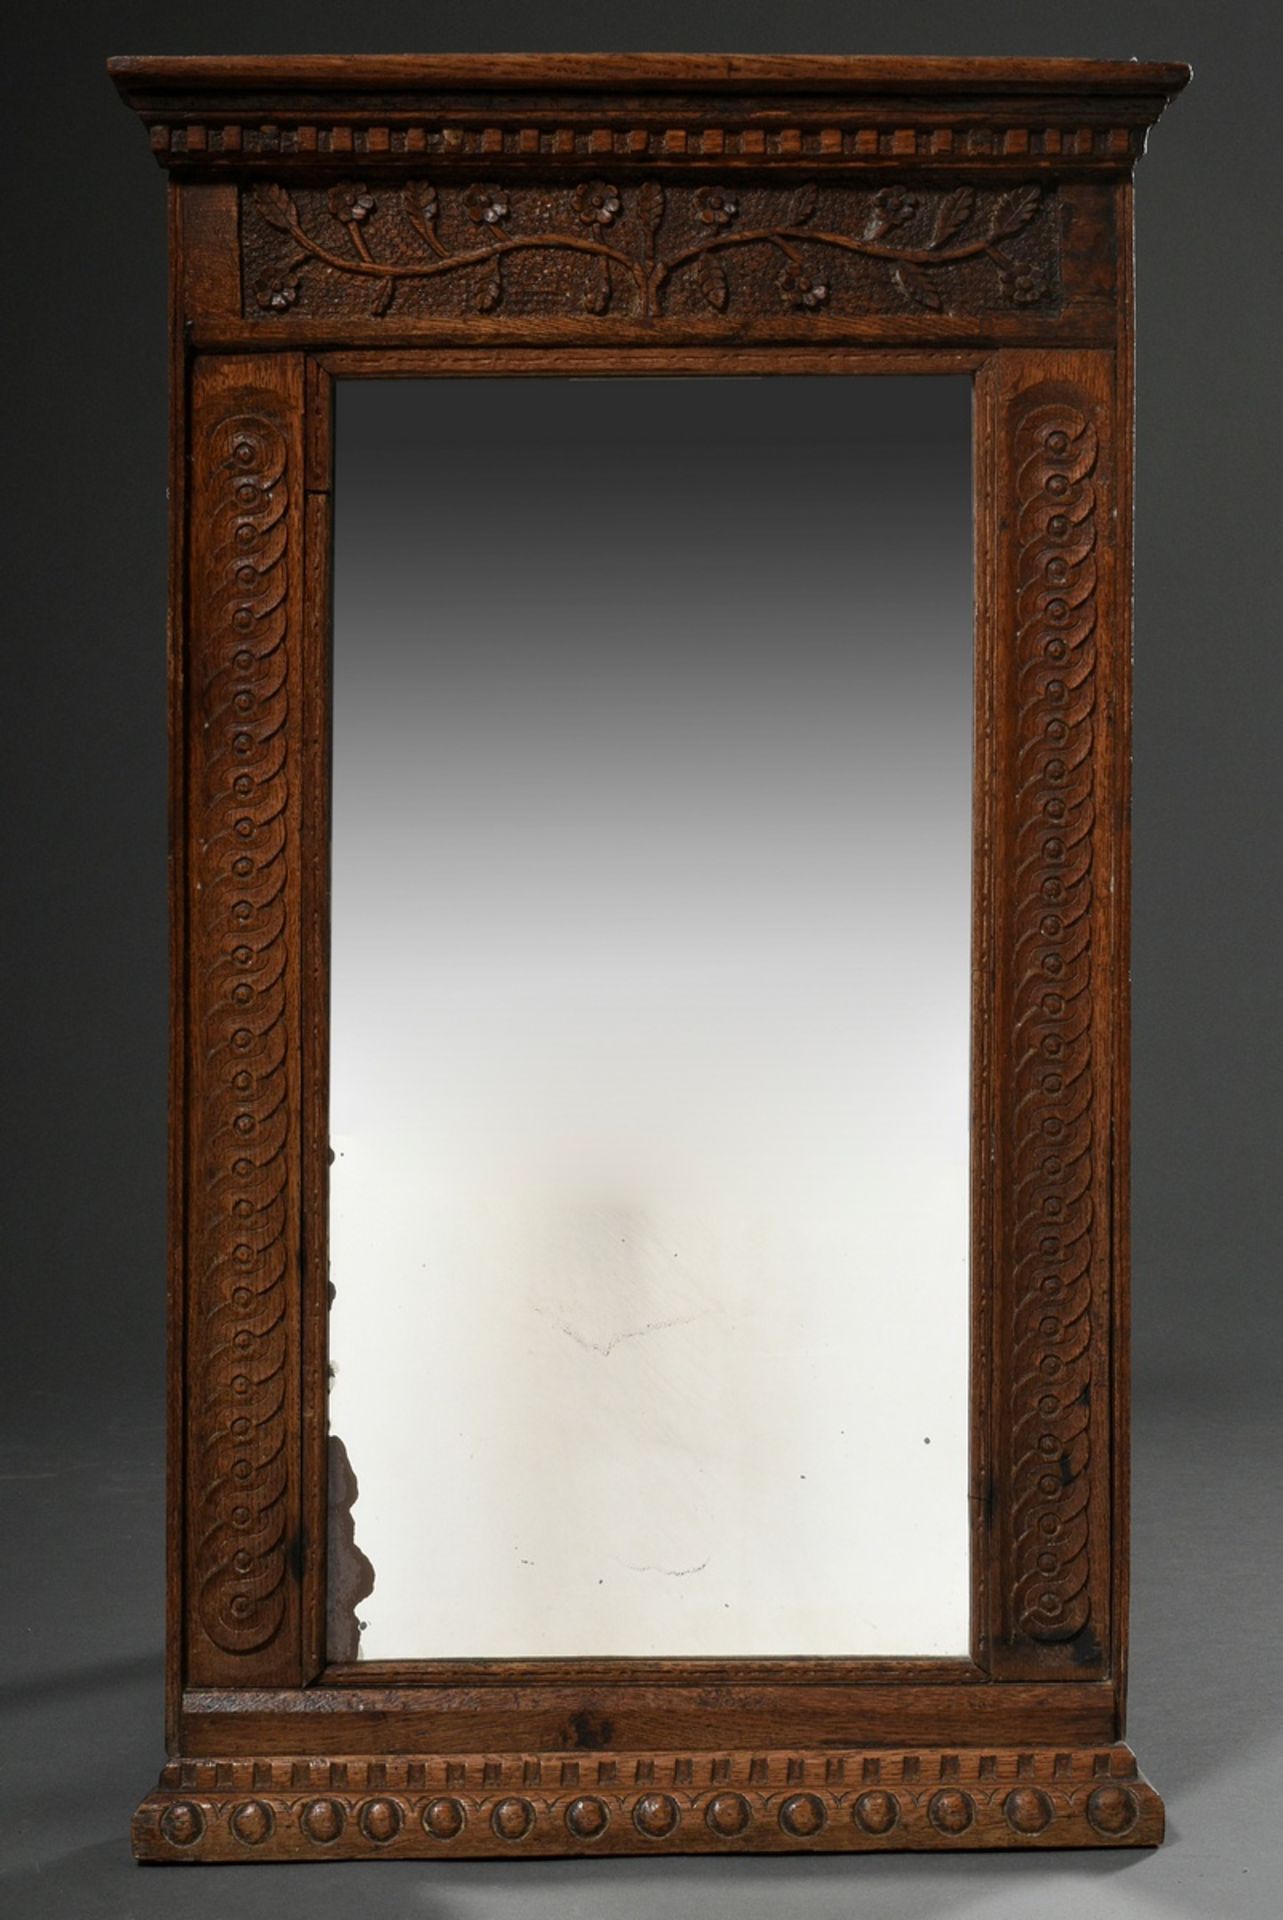 Rustic console mirror in ornamental and vegetal carved oak frame, old mirror glass, 88x53cm, small 